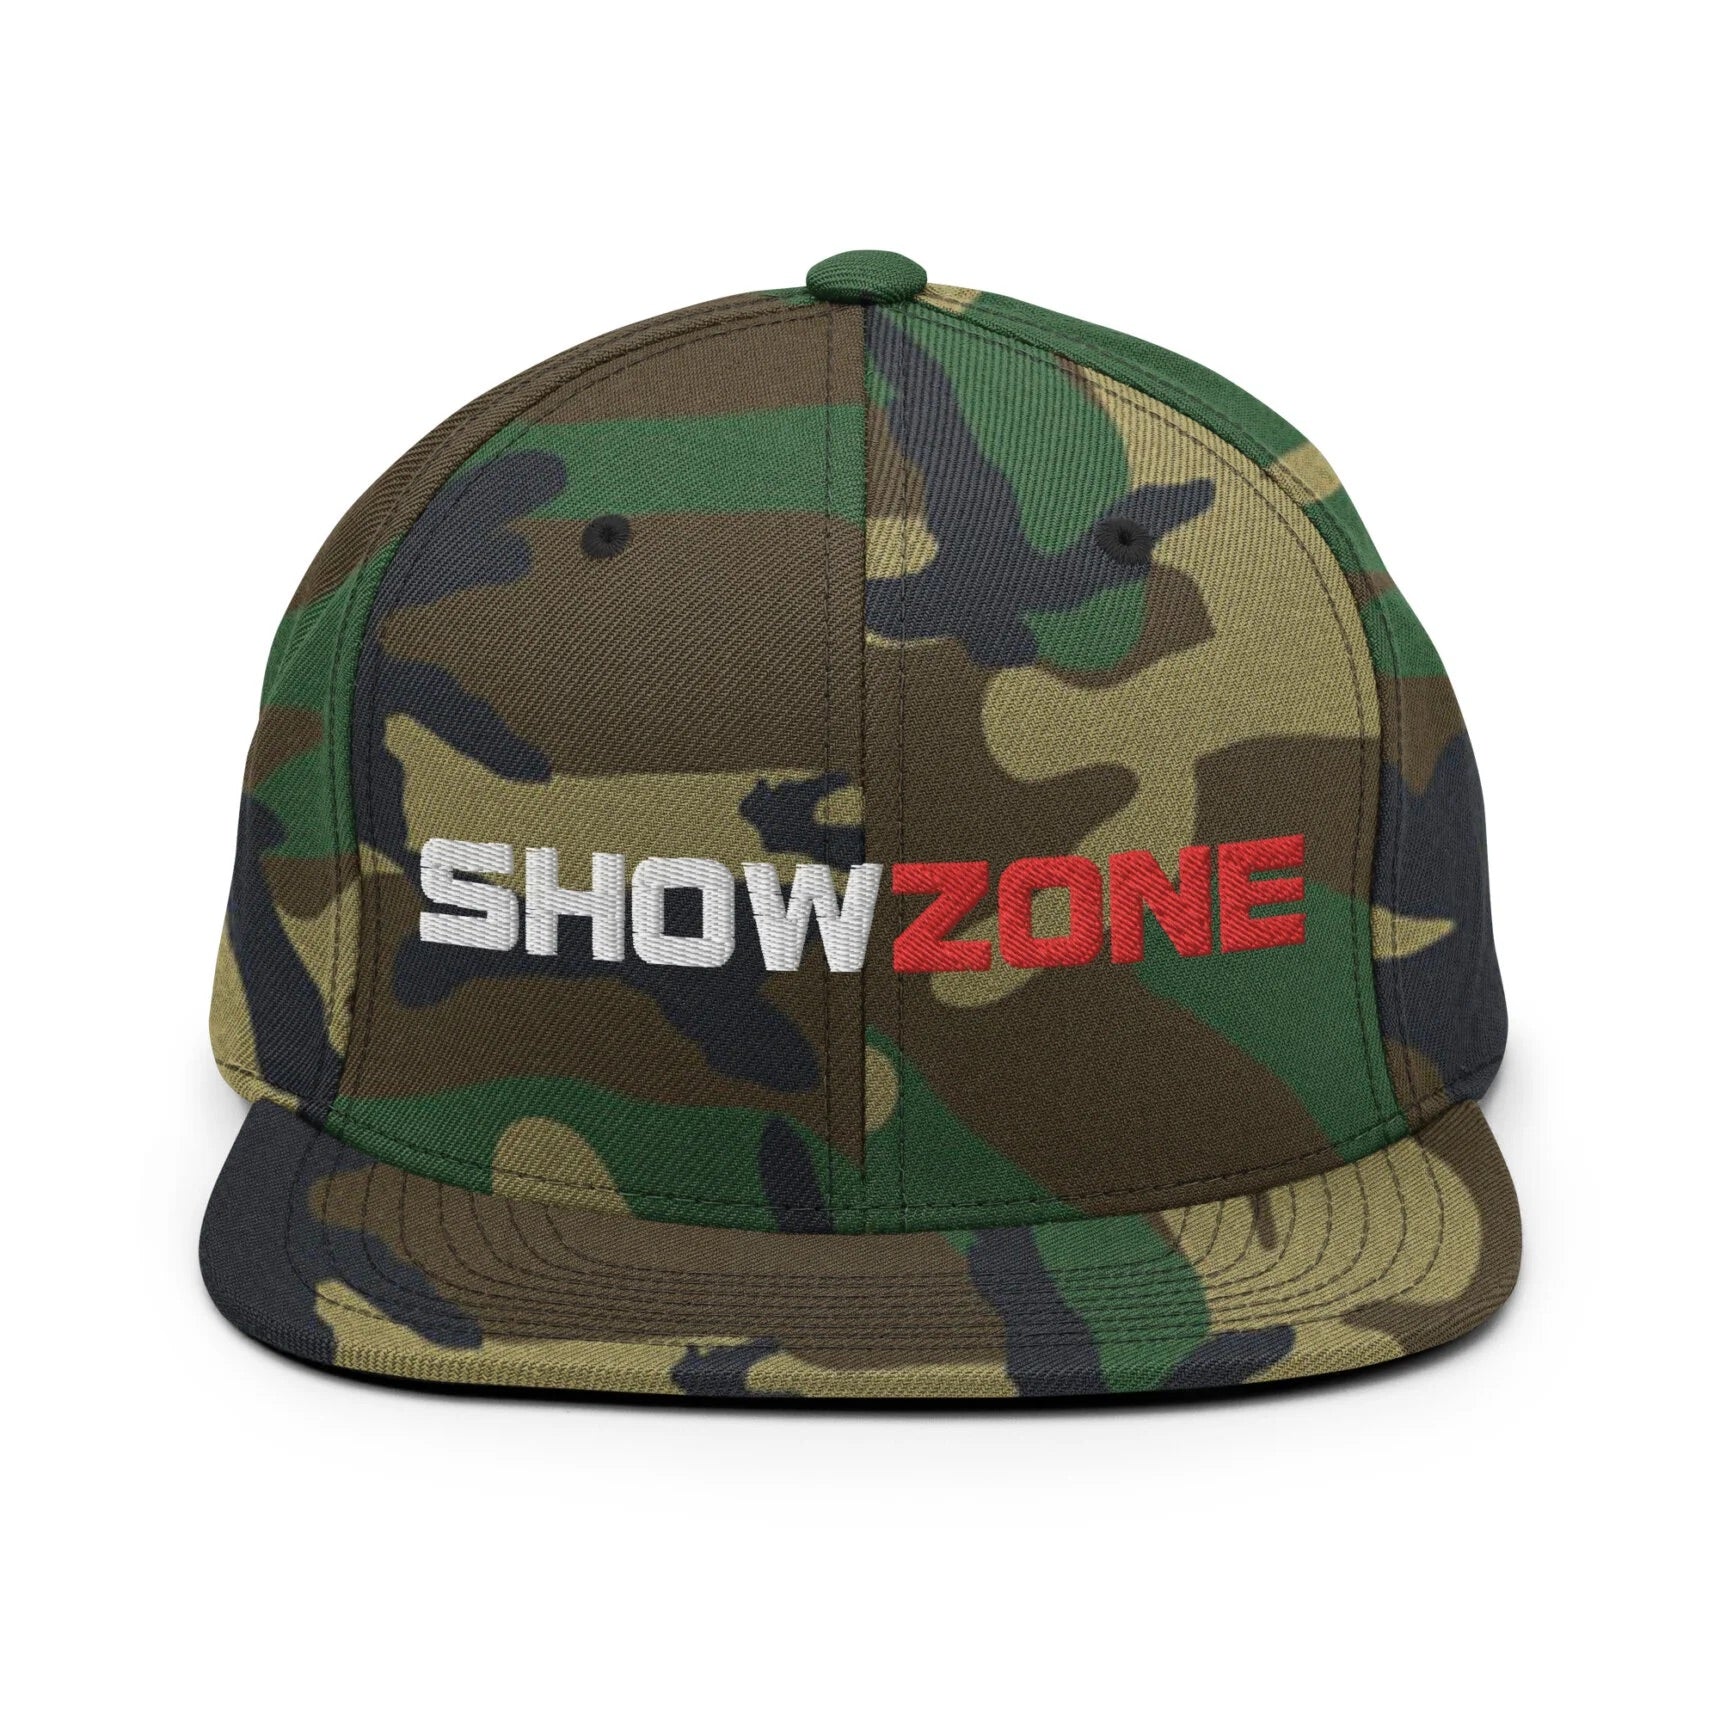 ShowZone snapback hat in green camo with text logo